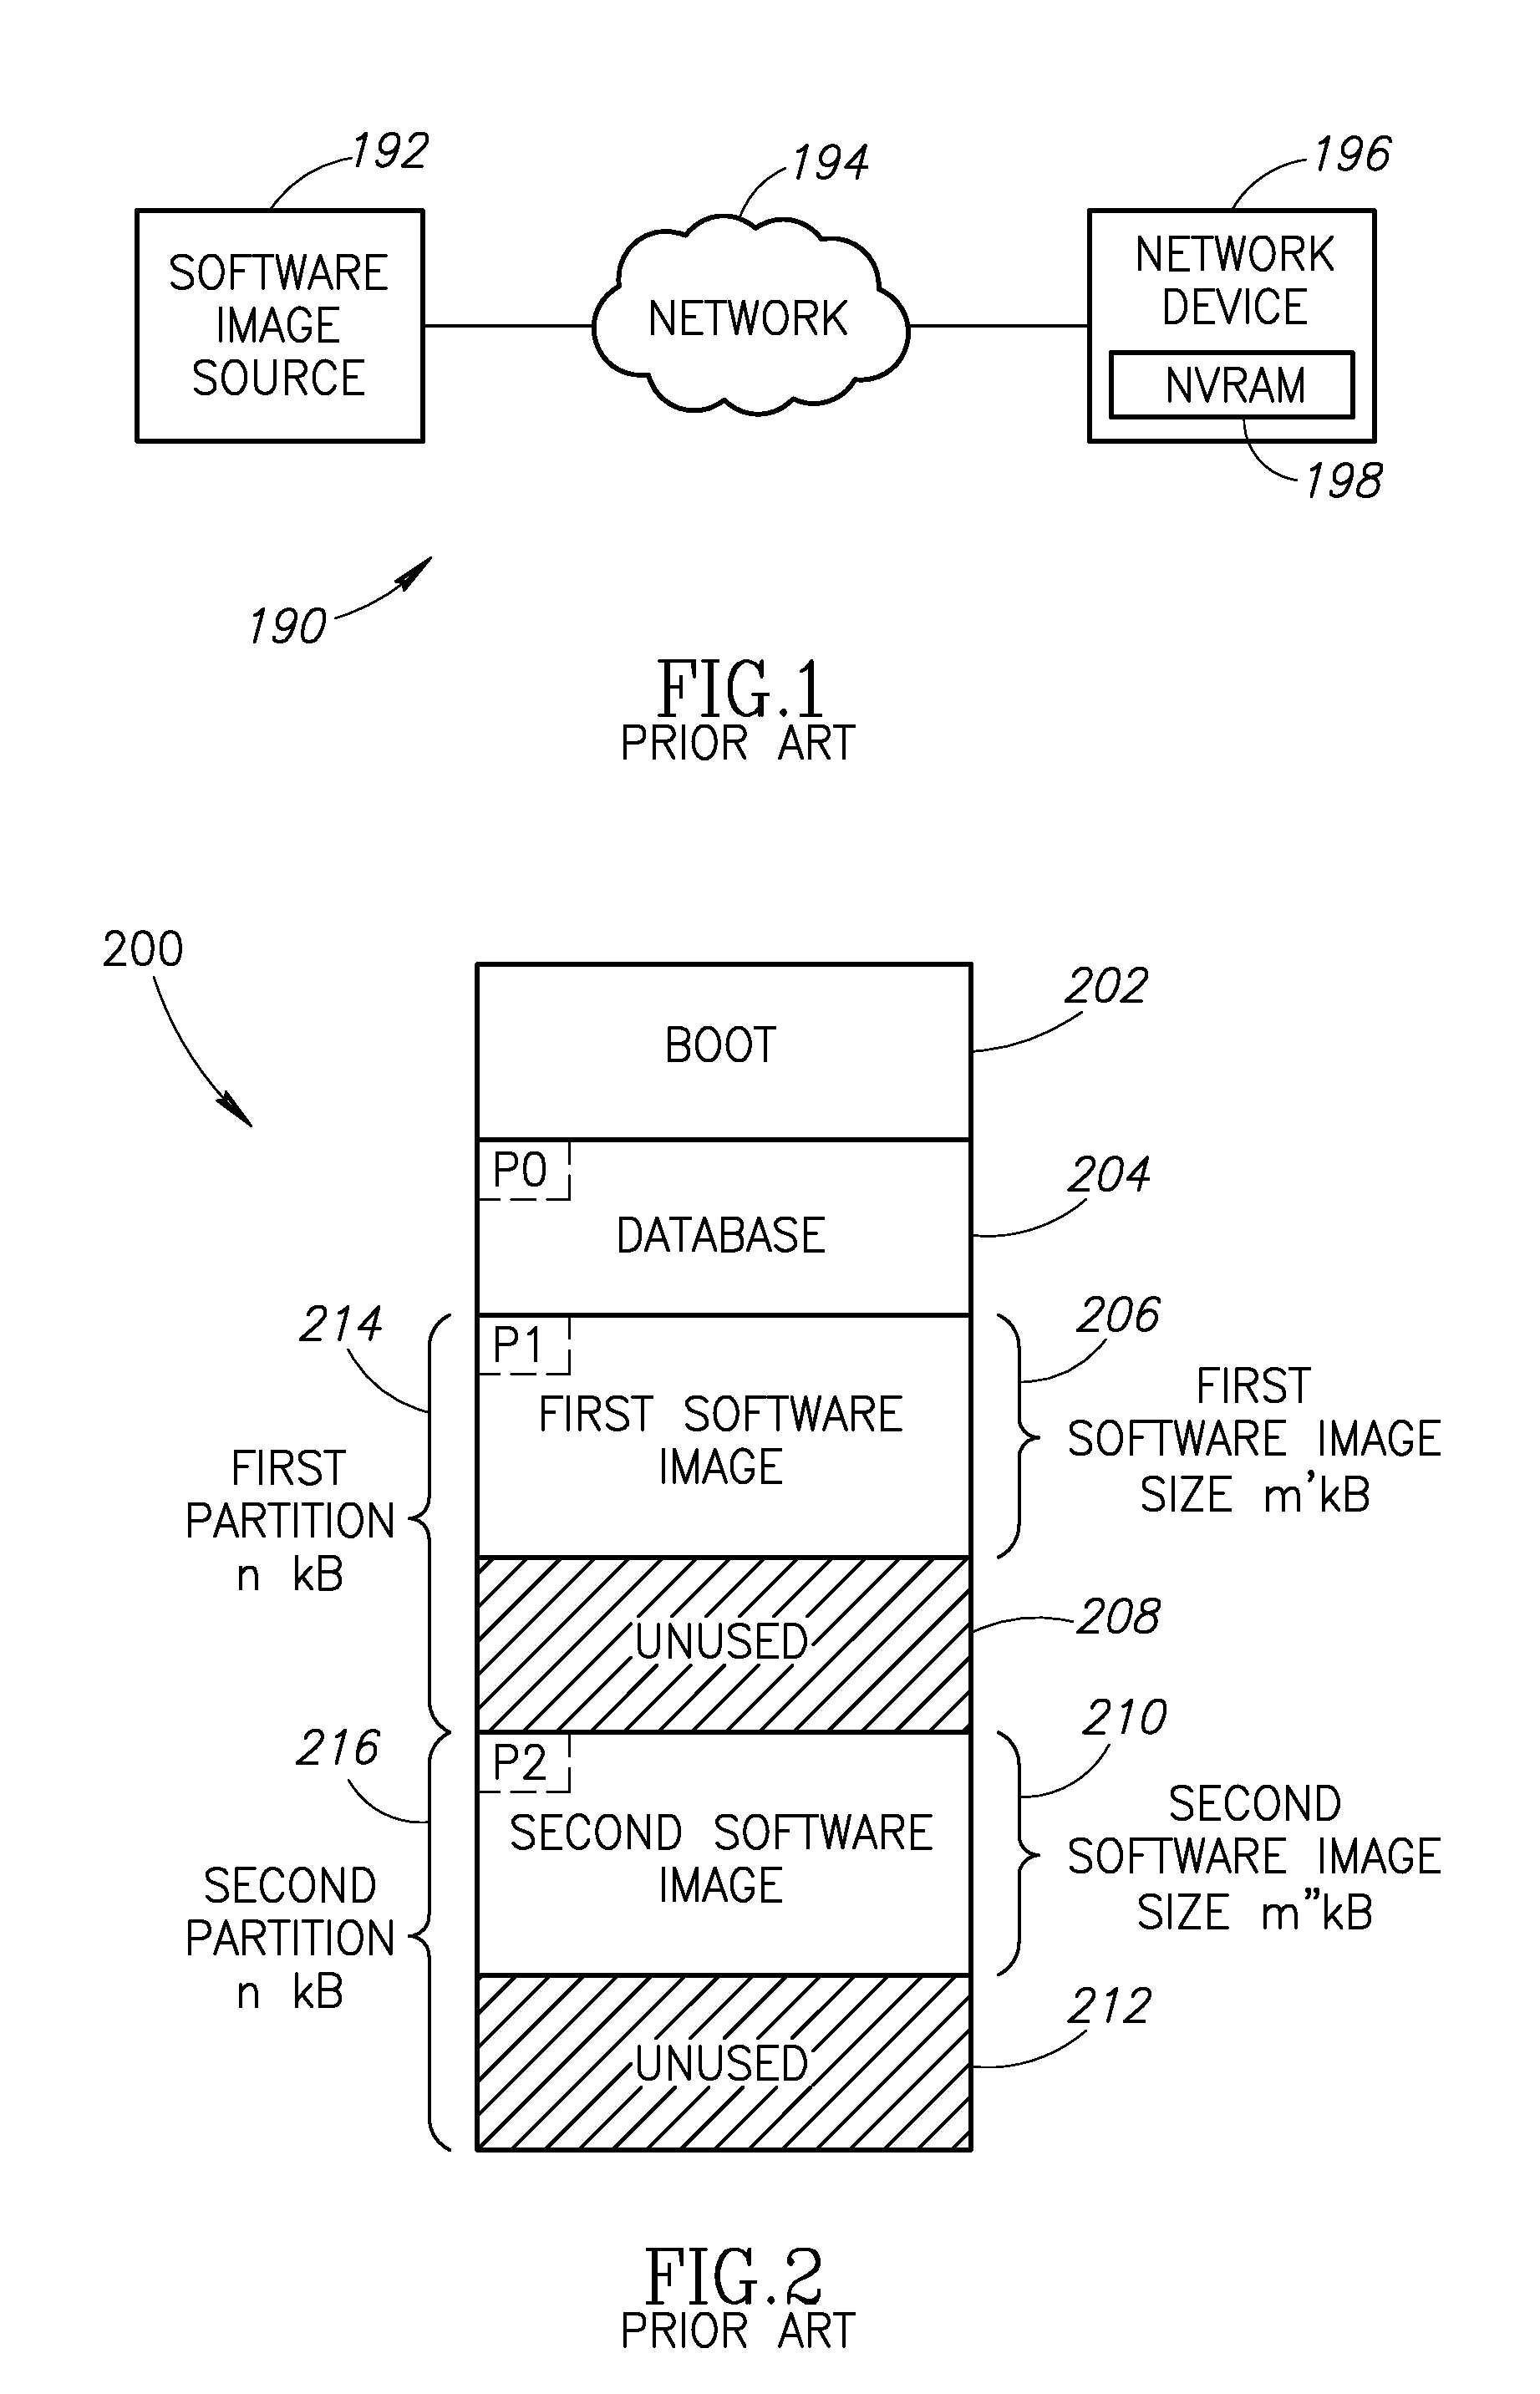 Dynamic asymmetric partitioning of program code memory in network connected devices